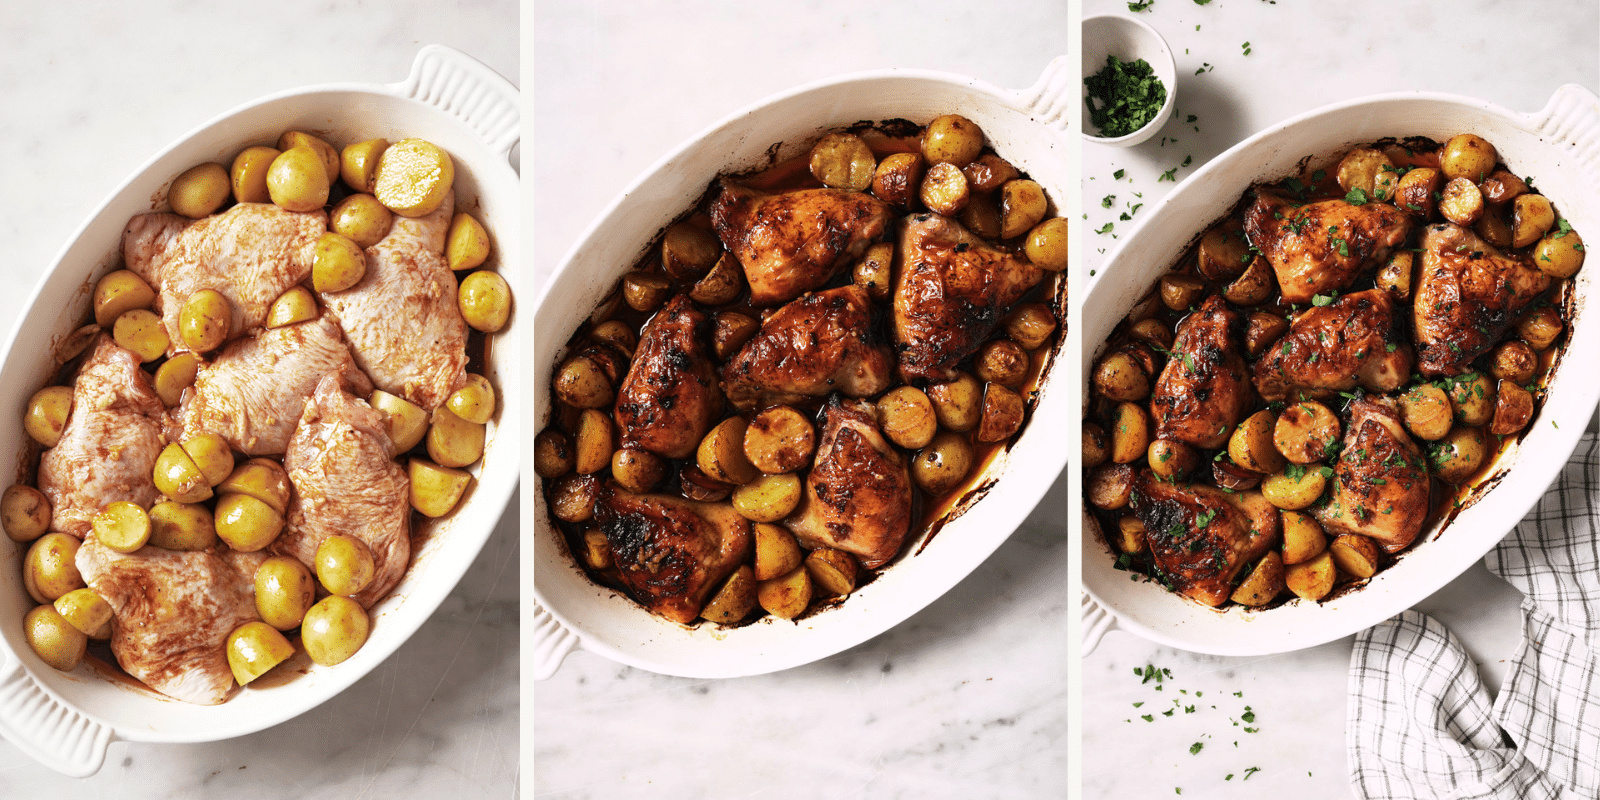 Left: potatoes added to the baking dish. Center: cooked chicken and potatoes. Right: parsley added. 